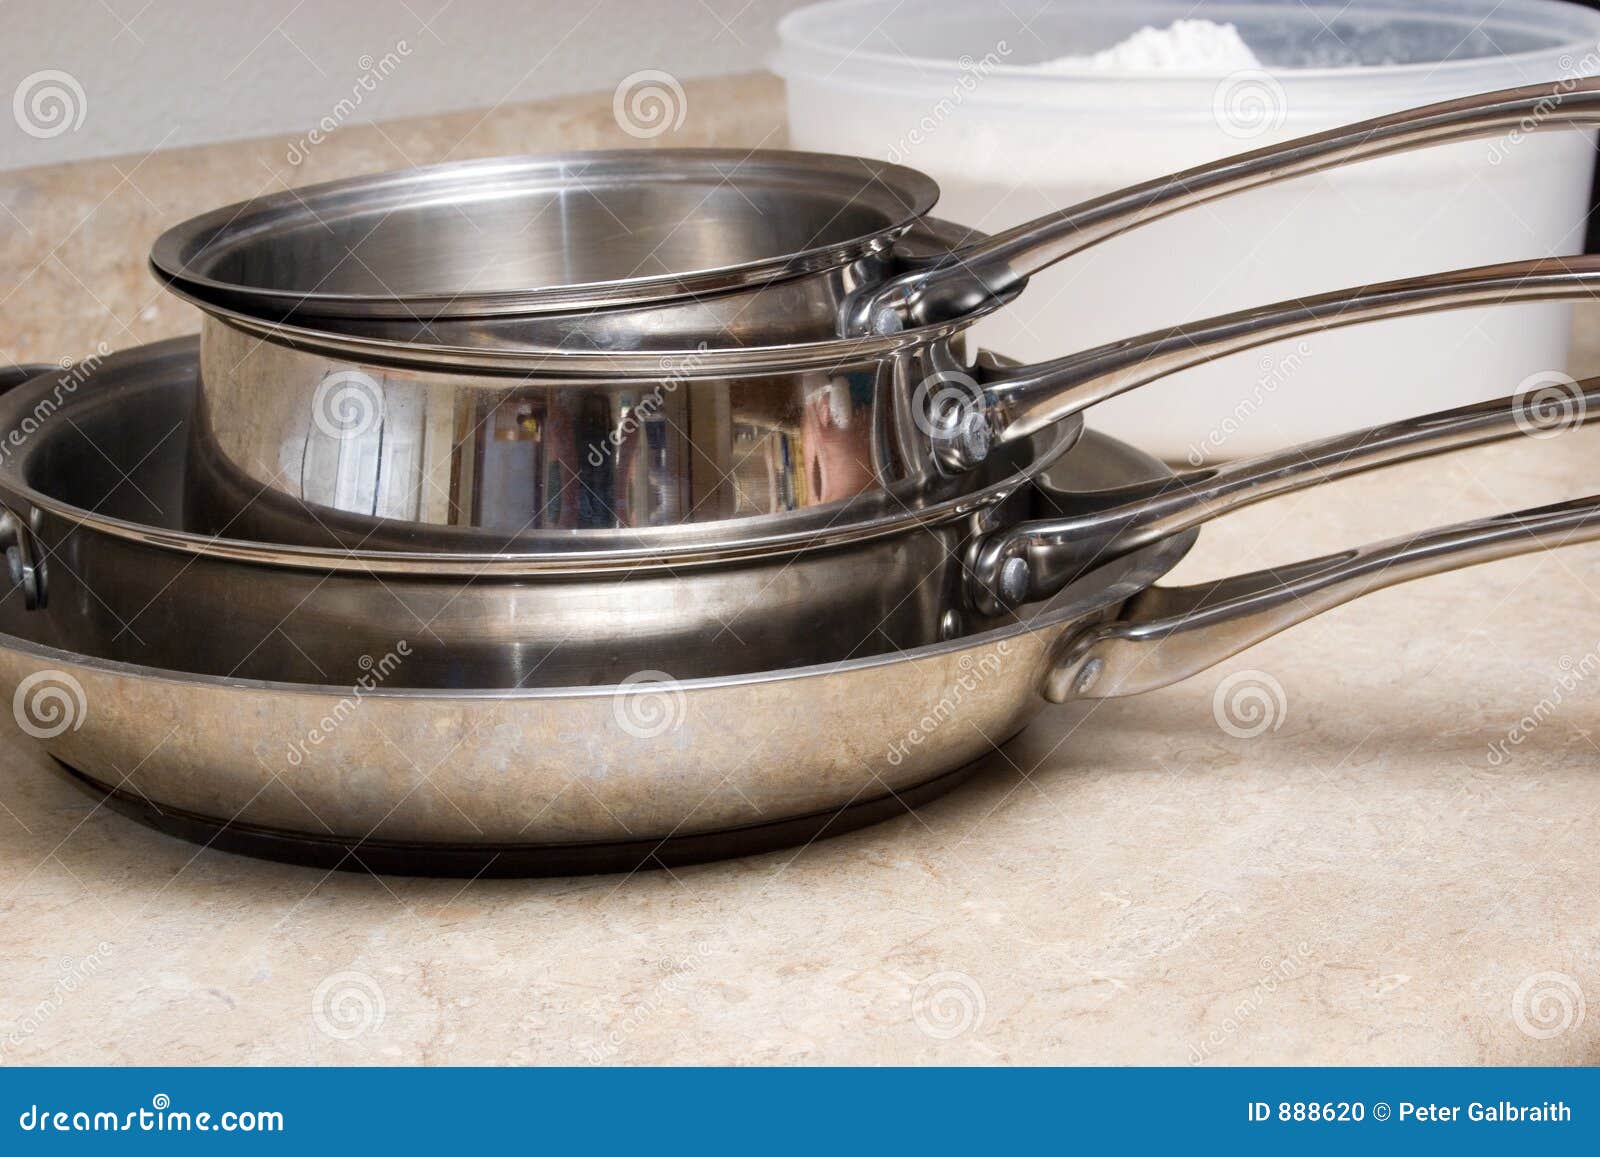 19,500+ Pots And Pans Stacked Stock Photos, Pictures & Royalty